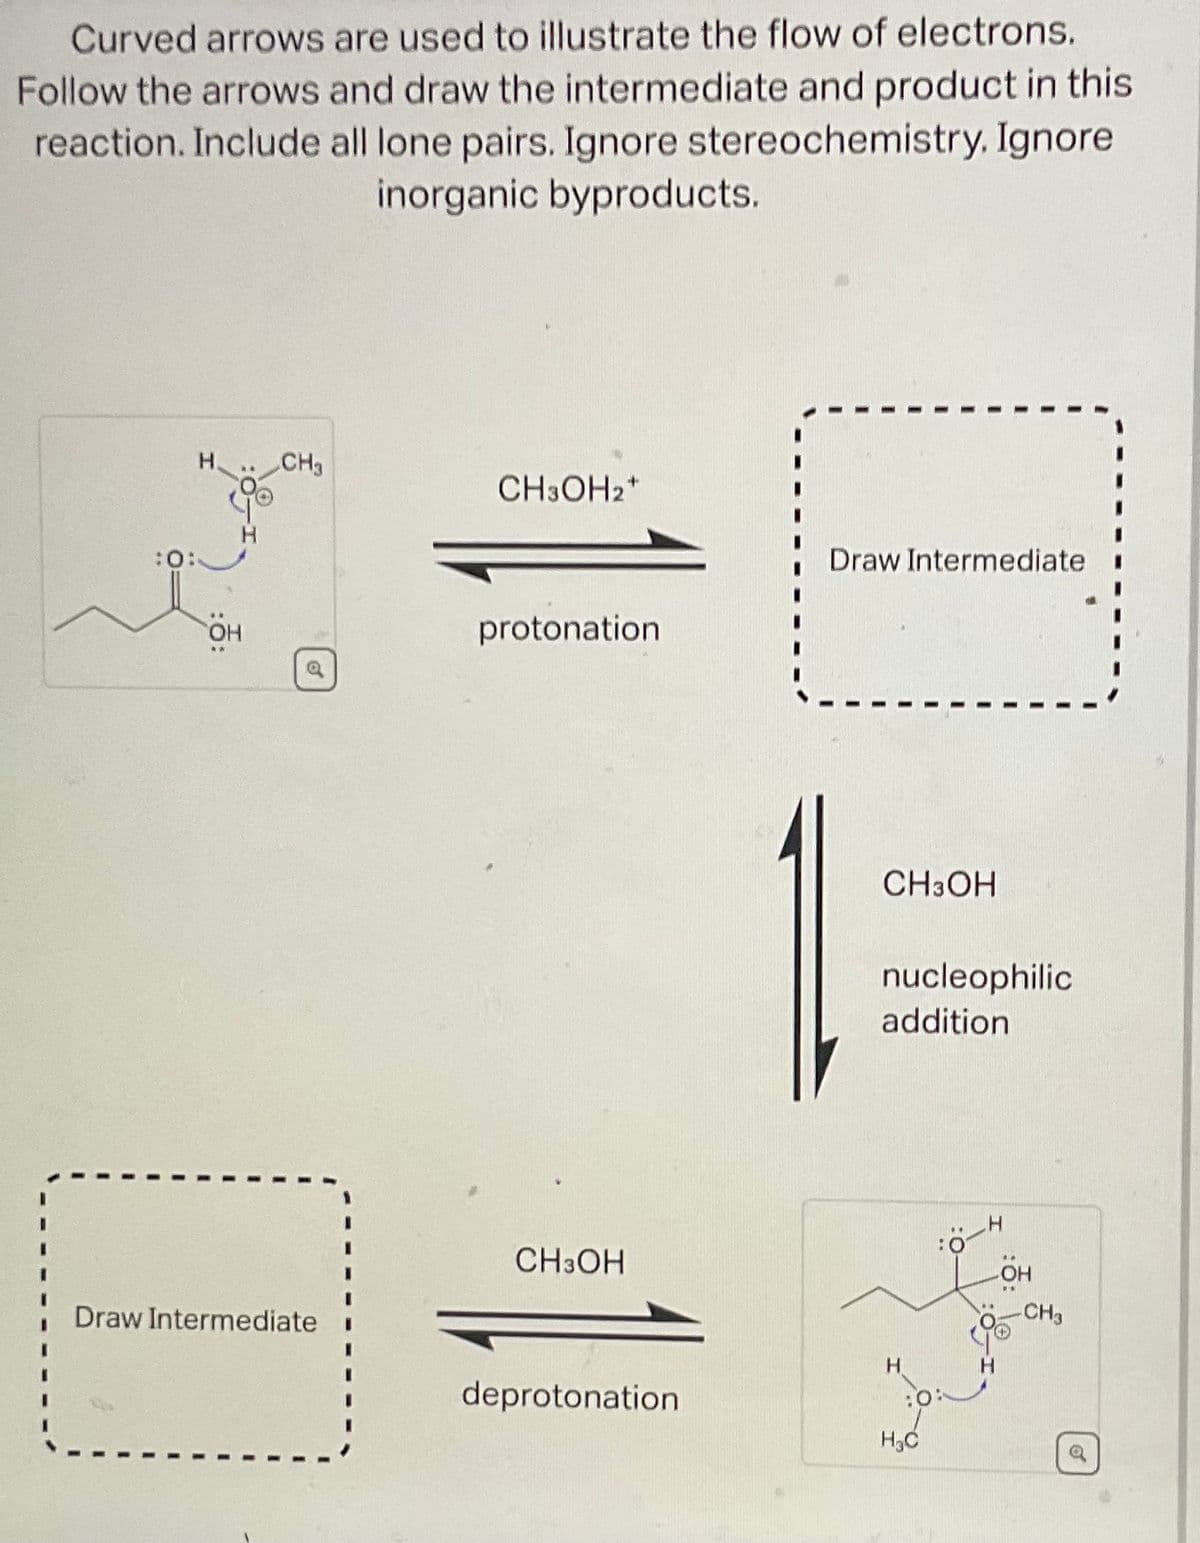 Curved arrows are used to illustrate the flow of electrons.
Follow the arrows and draw the intermediate and product in this
reaction. Include all lone pairs. Ignore stereochemistry. Ignore
inorganic byproducts.
:0:
H. CH3
OH
Draw Intermediate
CH3OH2+
protonation.
CH3OH
deprotonation
Draw Intermediate
CH3OH
nucleophilic
addition
H
H₂C
:6-
H
OH
-CH3